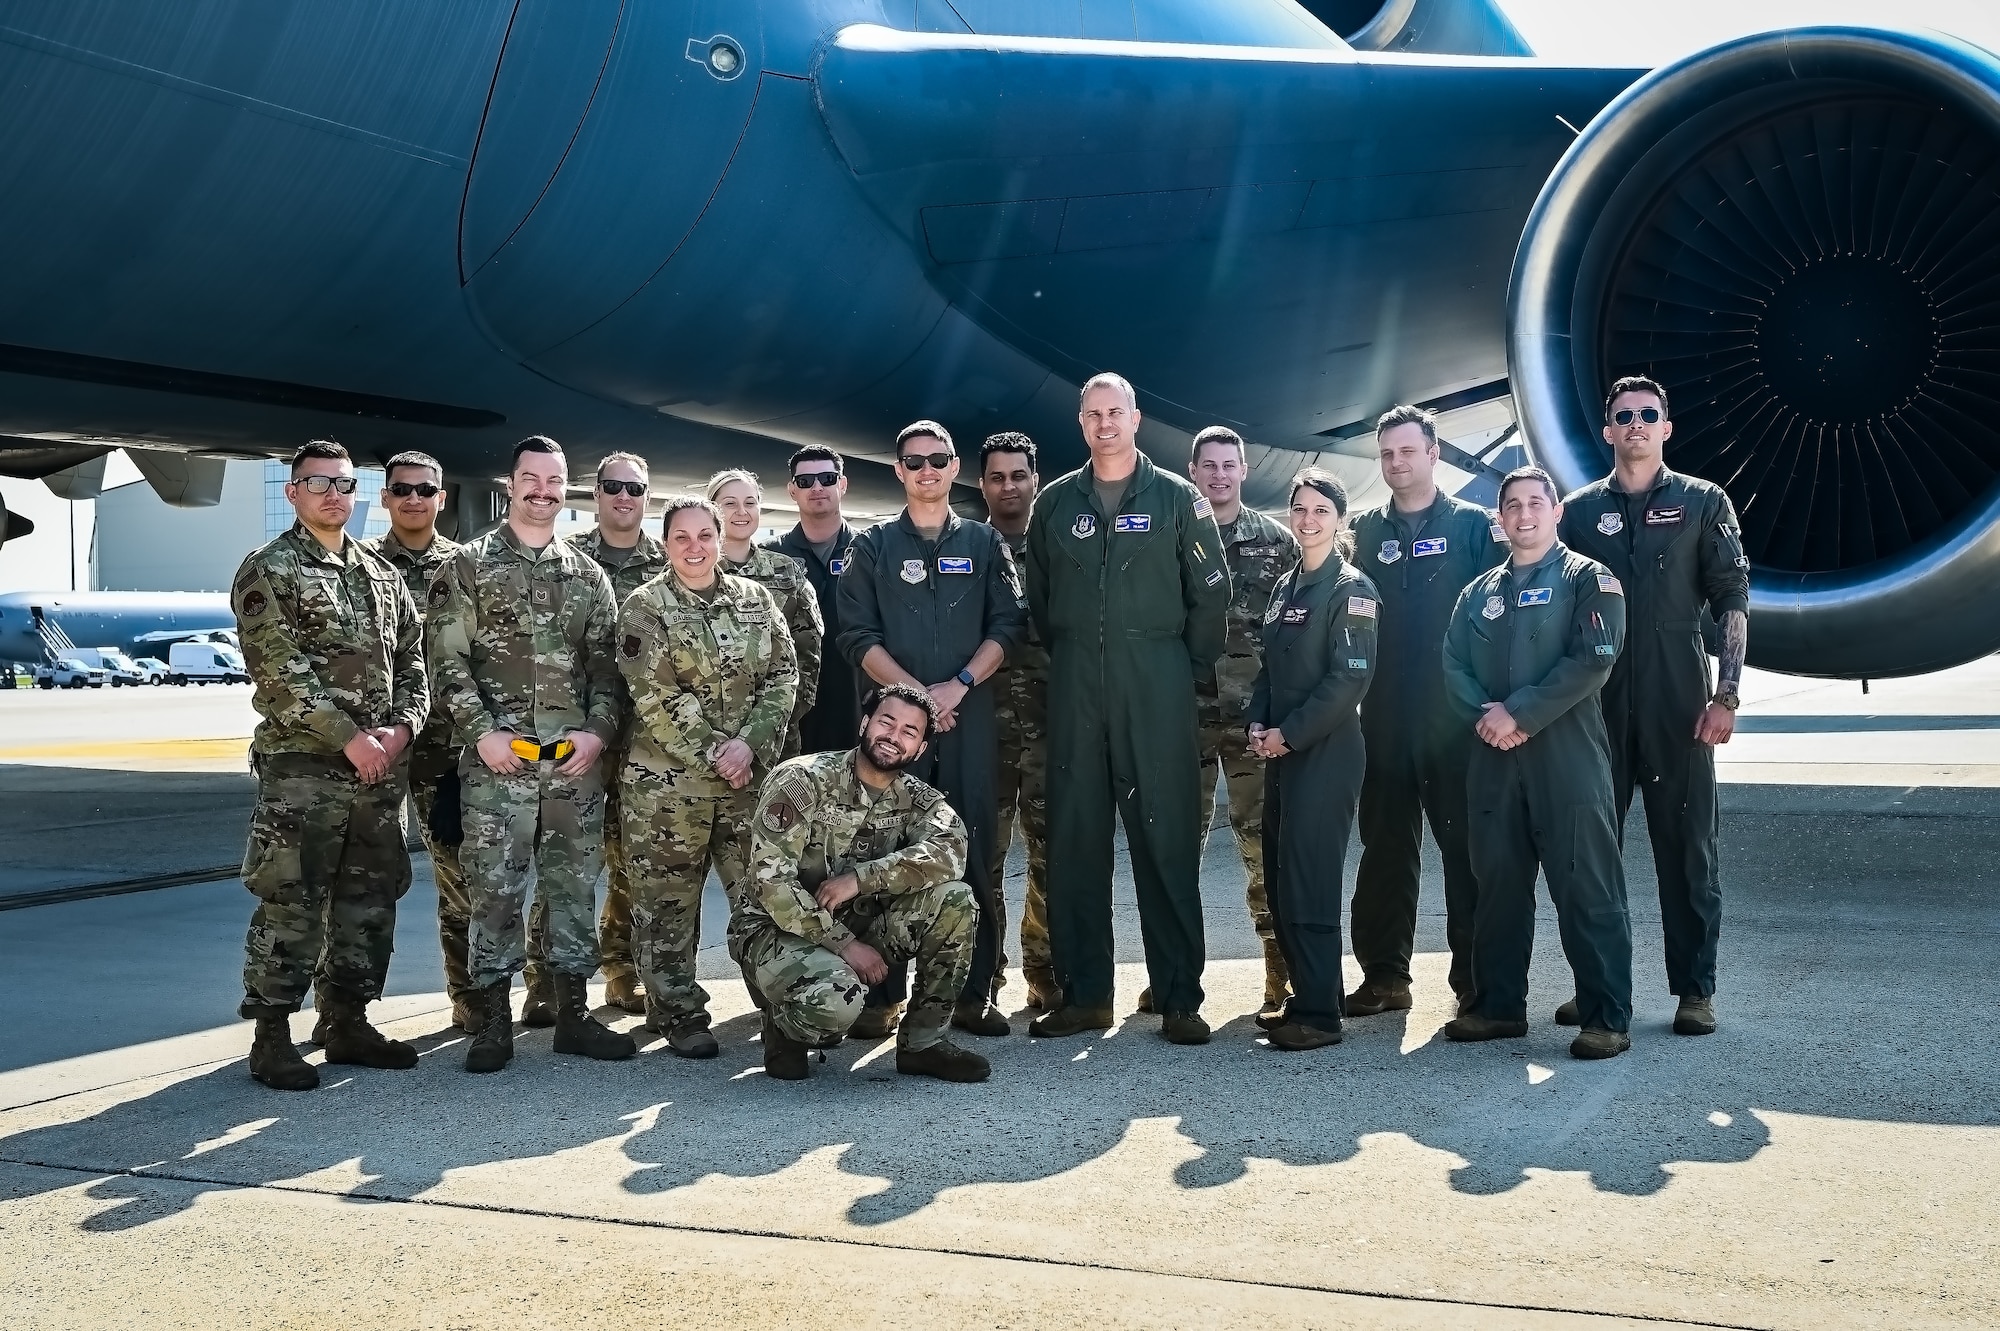 U.S. Air Force Airmen assigned to the 305th Air Mobility Wing, pose for a flight line photo on 11 May, 2023 at Joint Base McGuire-Dix-Lakehurst, N.J. The Aircrew is the last crew to fly a local KC-10 Extender sortie from the 305th AMW. The 305th AMW extends America's global reach by generating, mobilizing and deploying KC-10 Extenders and C-17 Globemaster III’s to conduct strategic airlift and air refueling missions worldwide. In November 2021, the Wing began transitioning to the new KC-46A Pegasus air refueling aircraft.